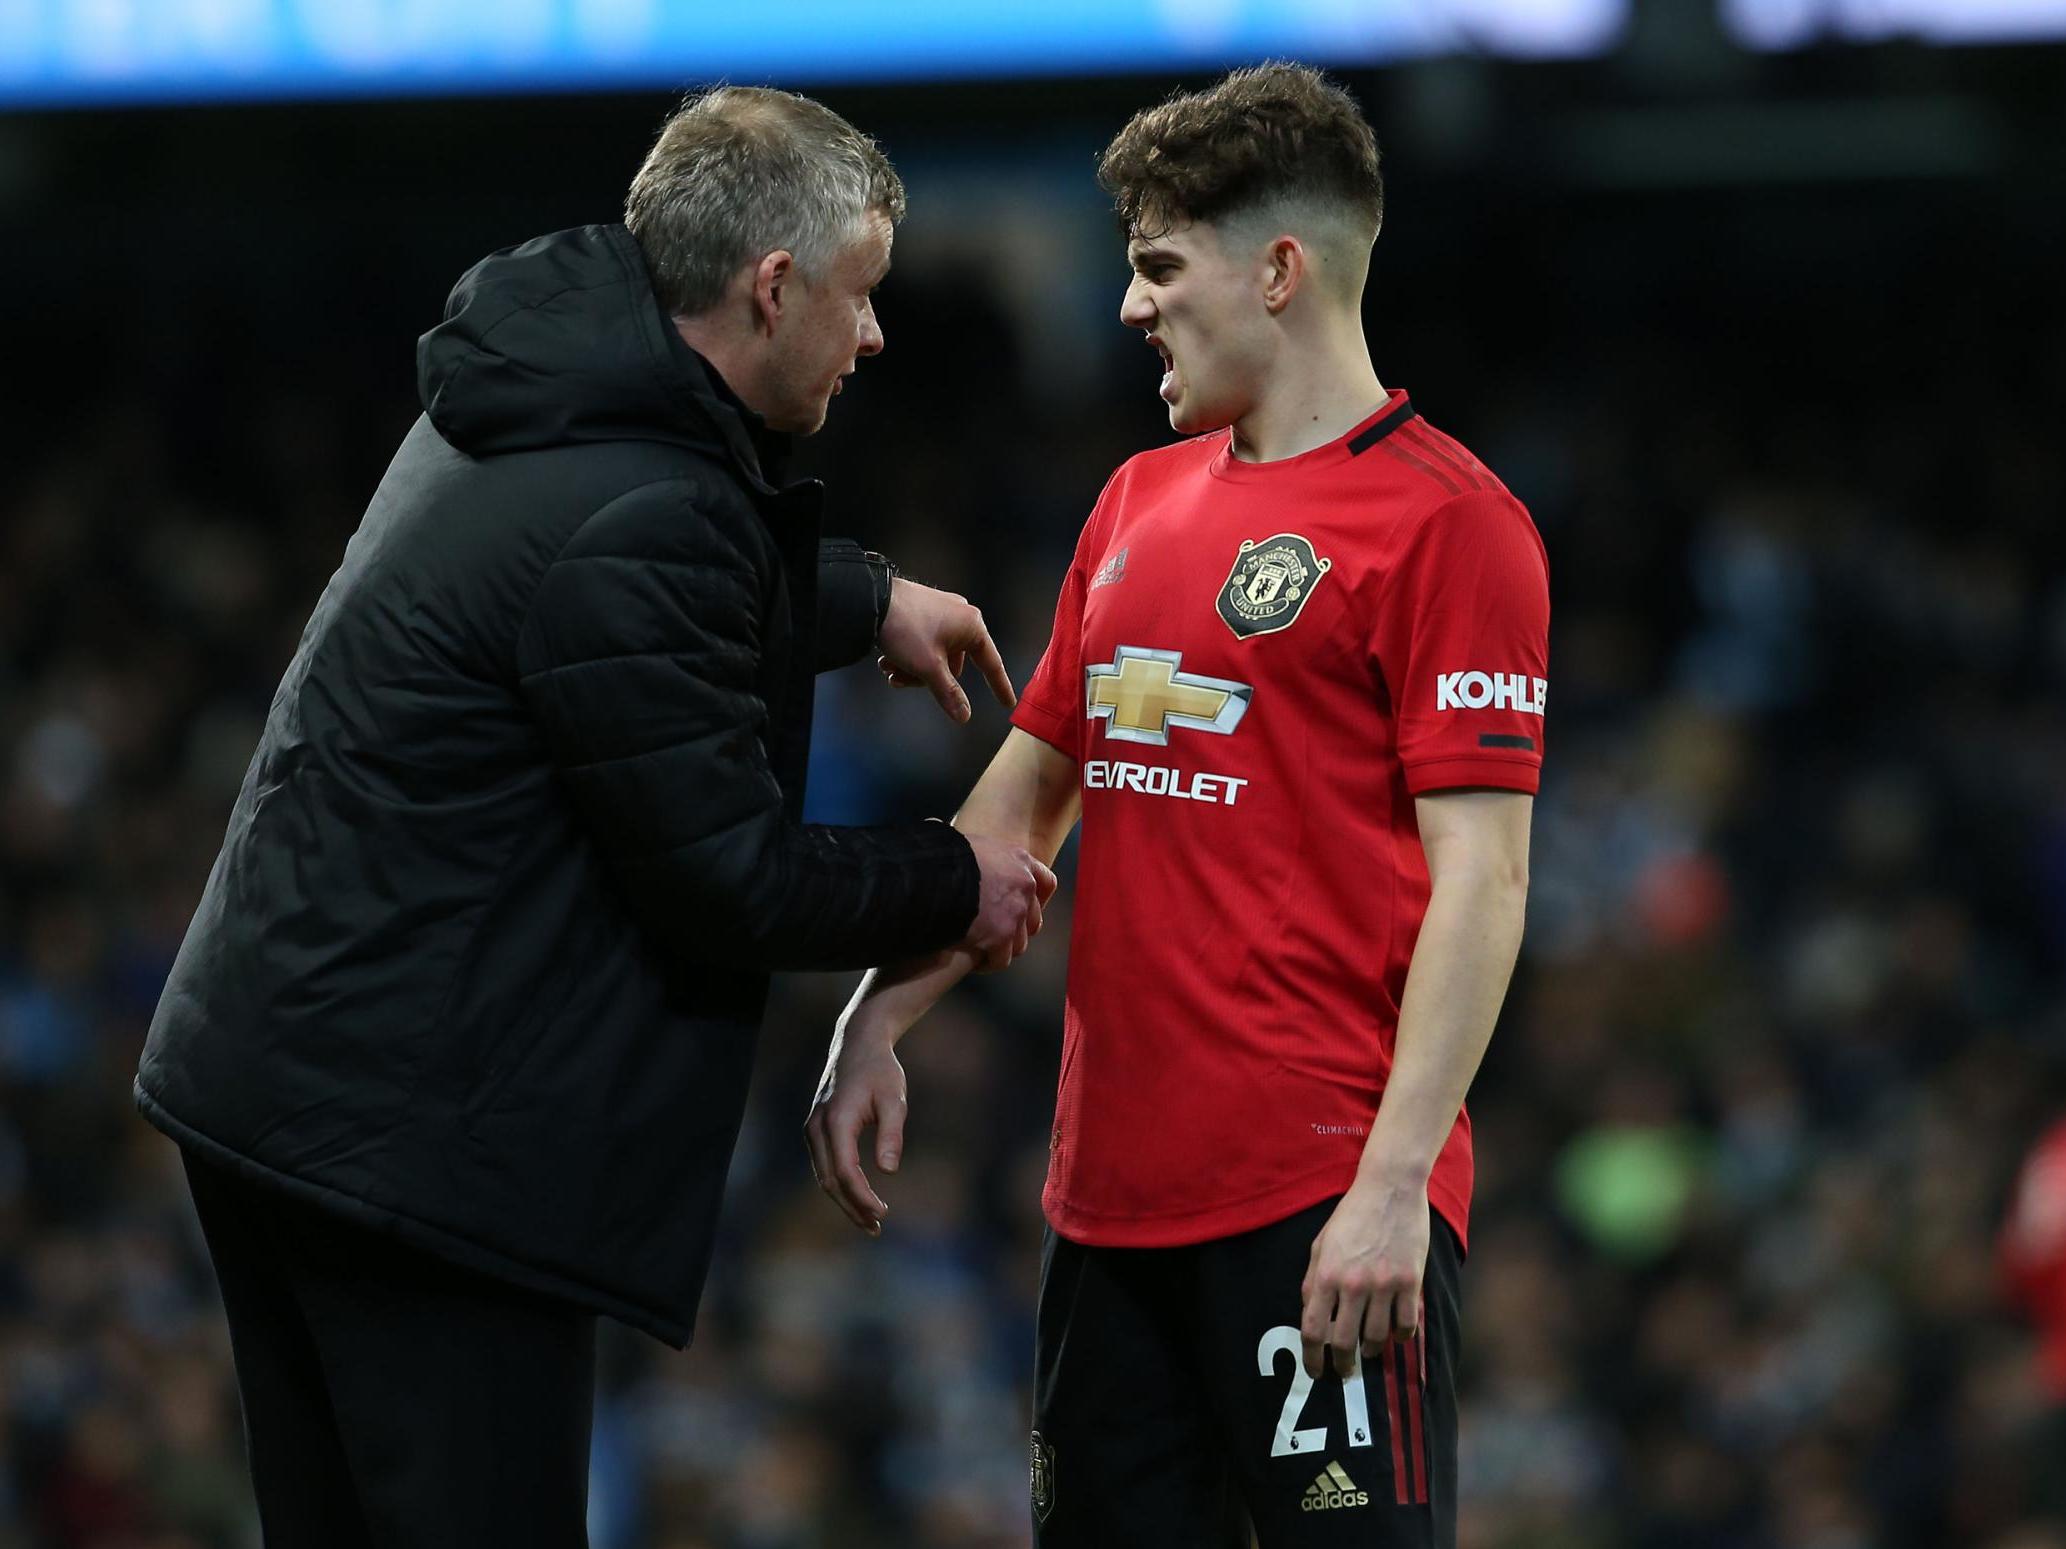 Manchester United boss Ole Gunnar Solskjaer wants referees to punish tactical fouling